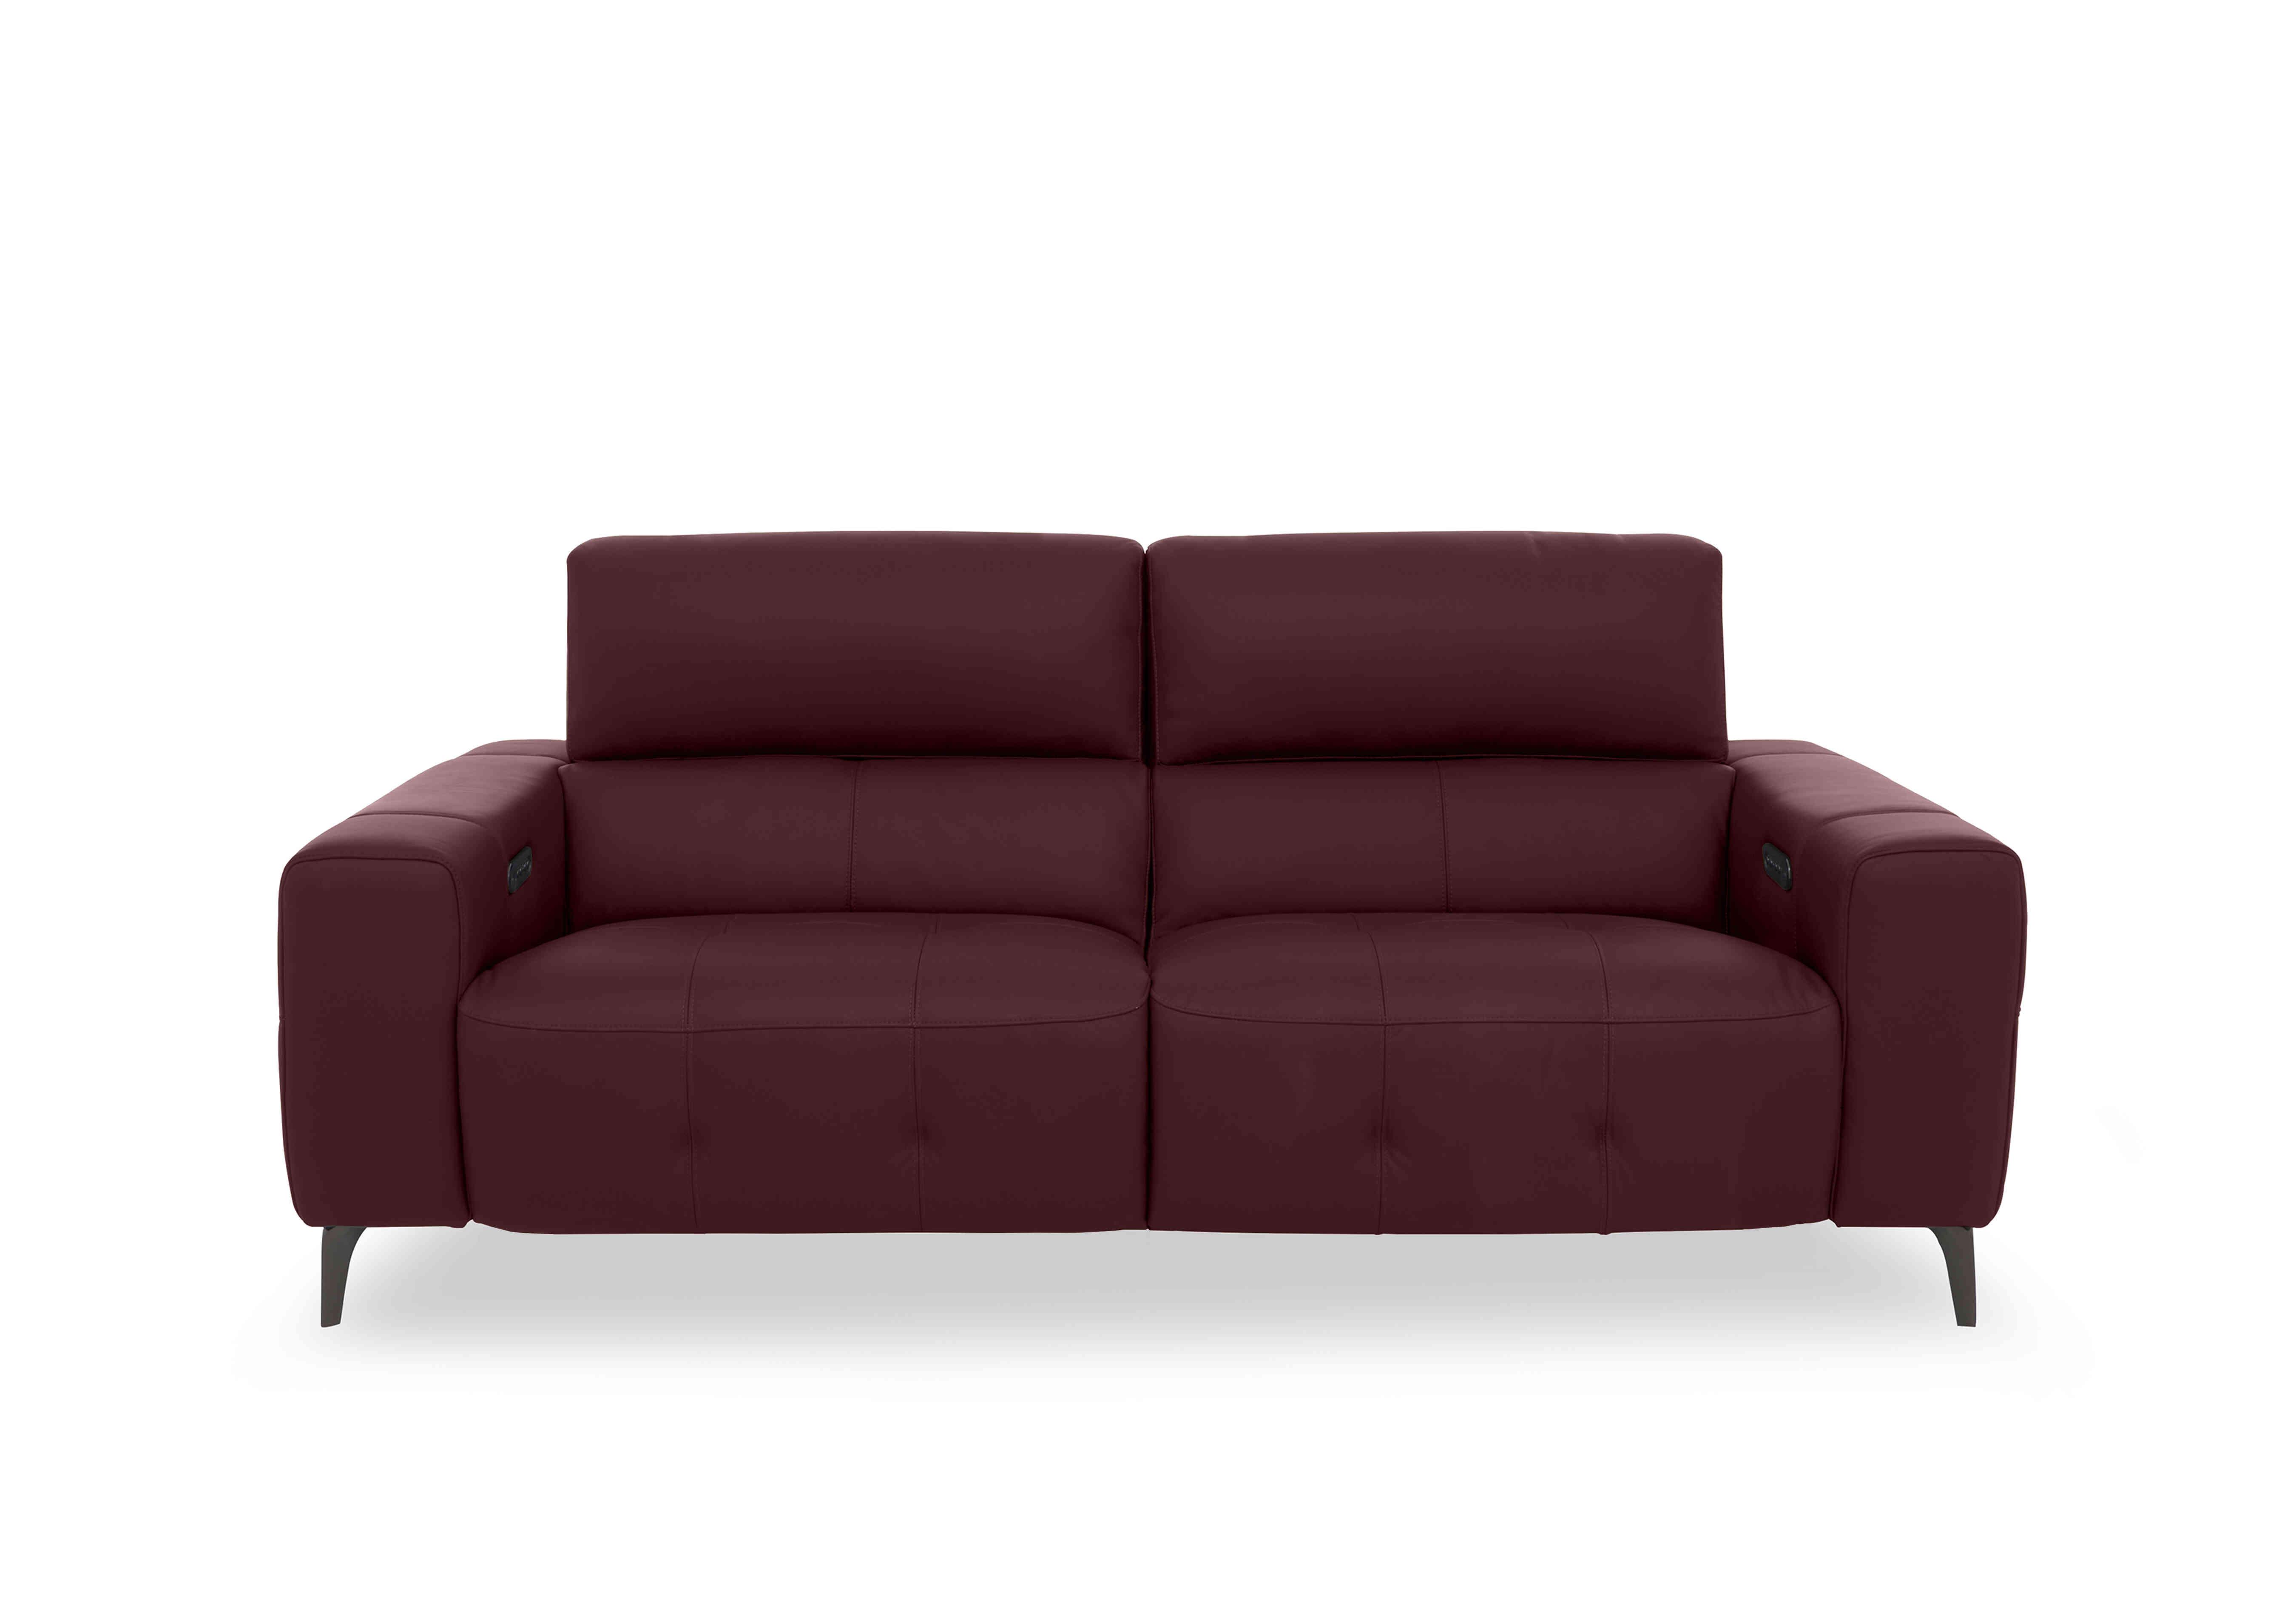 New York 3 Seater Leather Sofa in Bv-035c Deep Red on Furniture Village